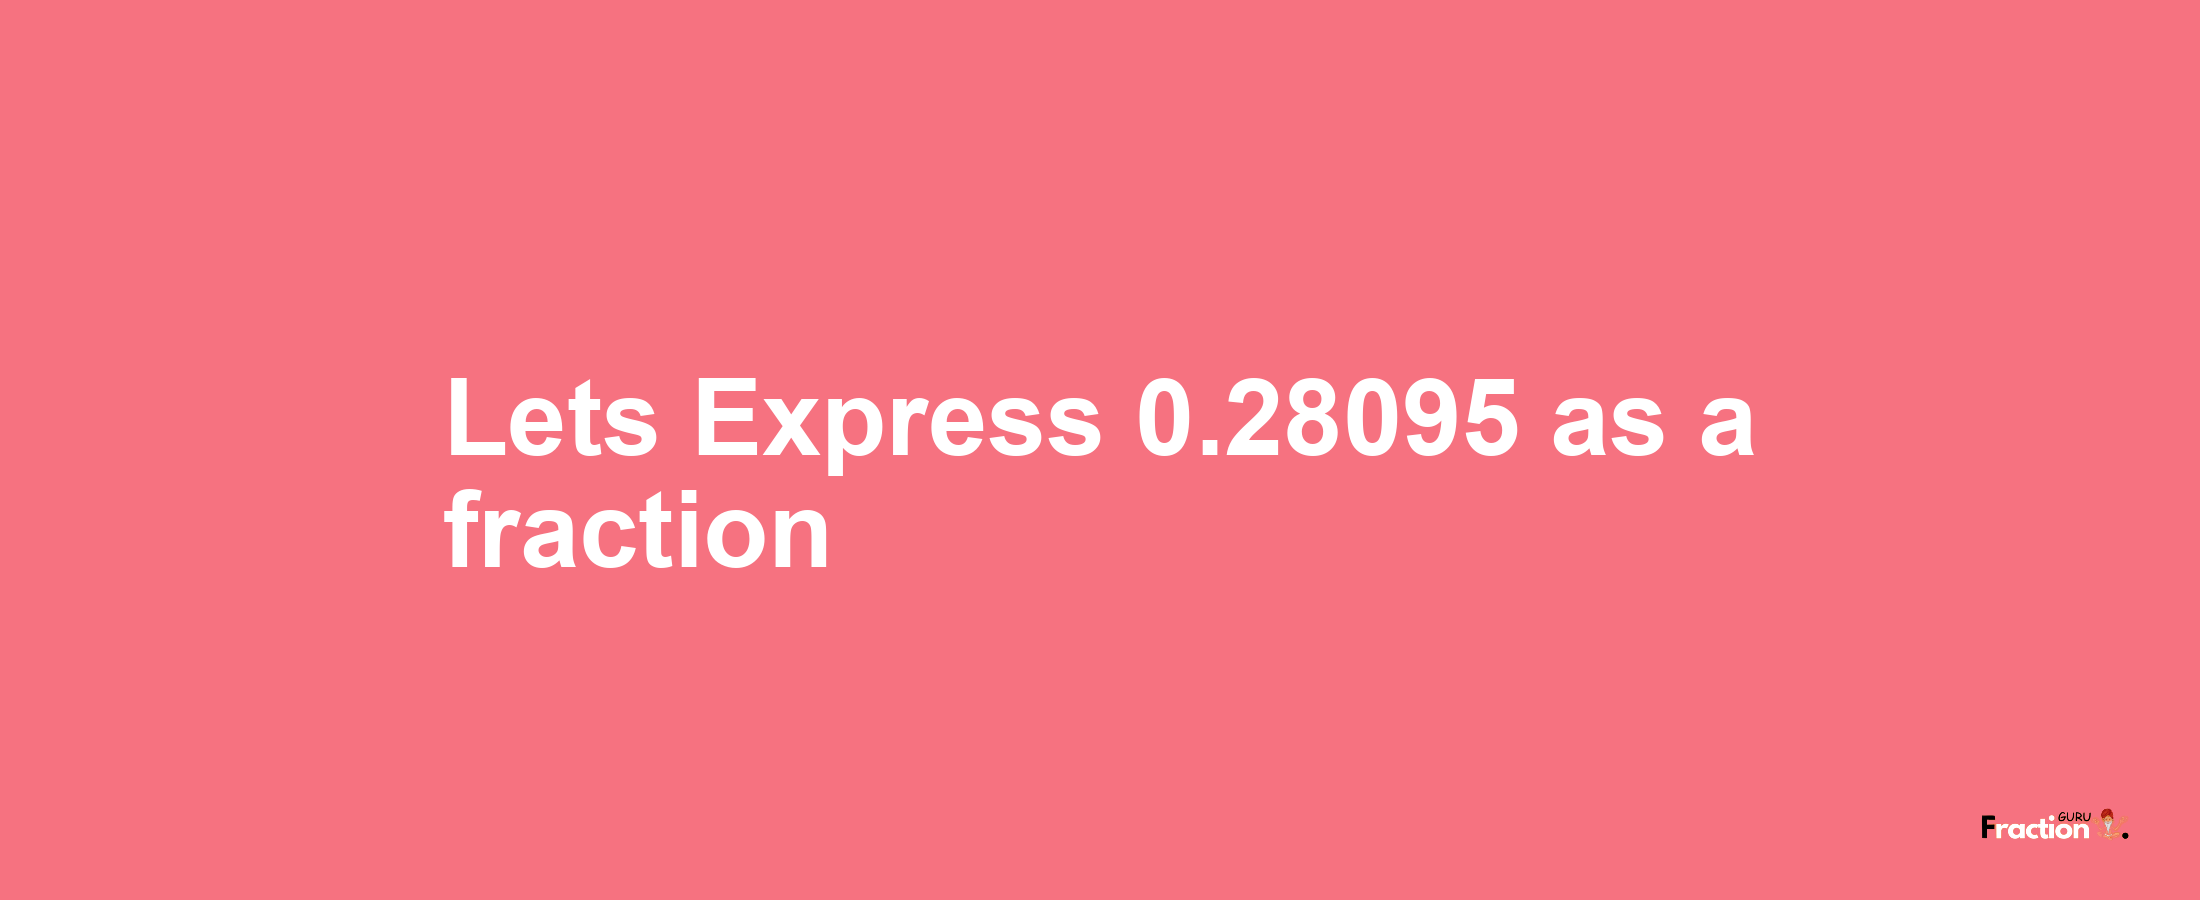 Lets Express 0.28095 as afraction